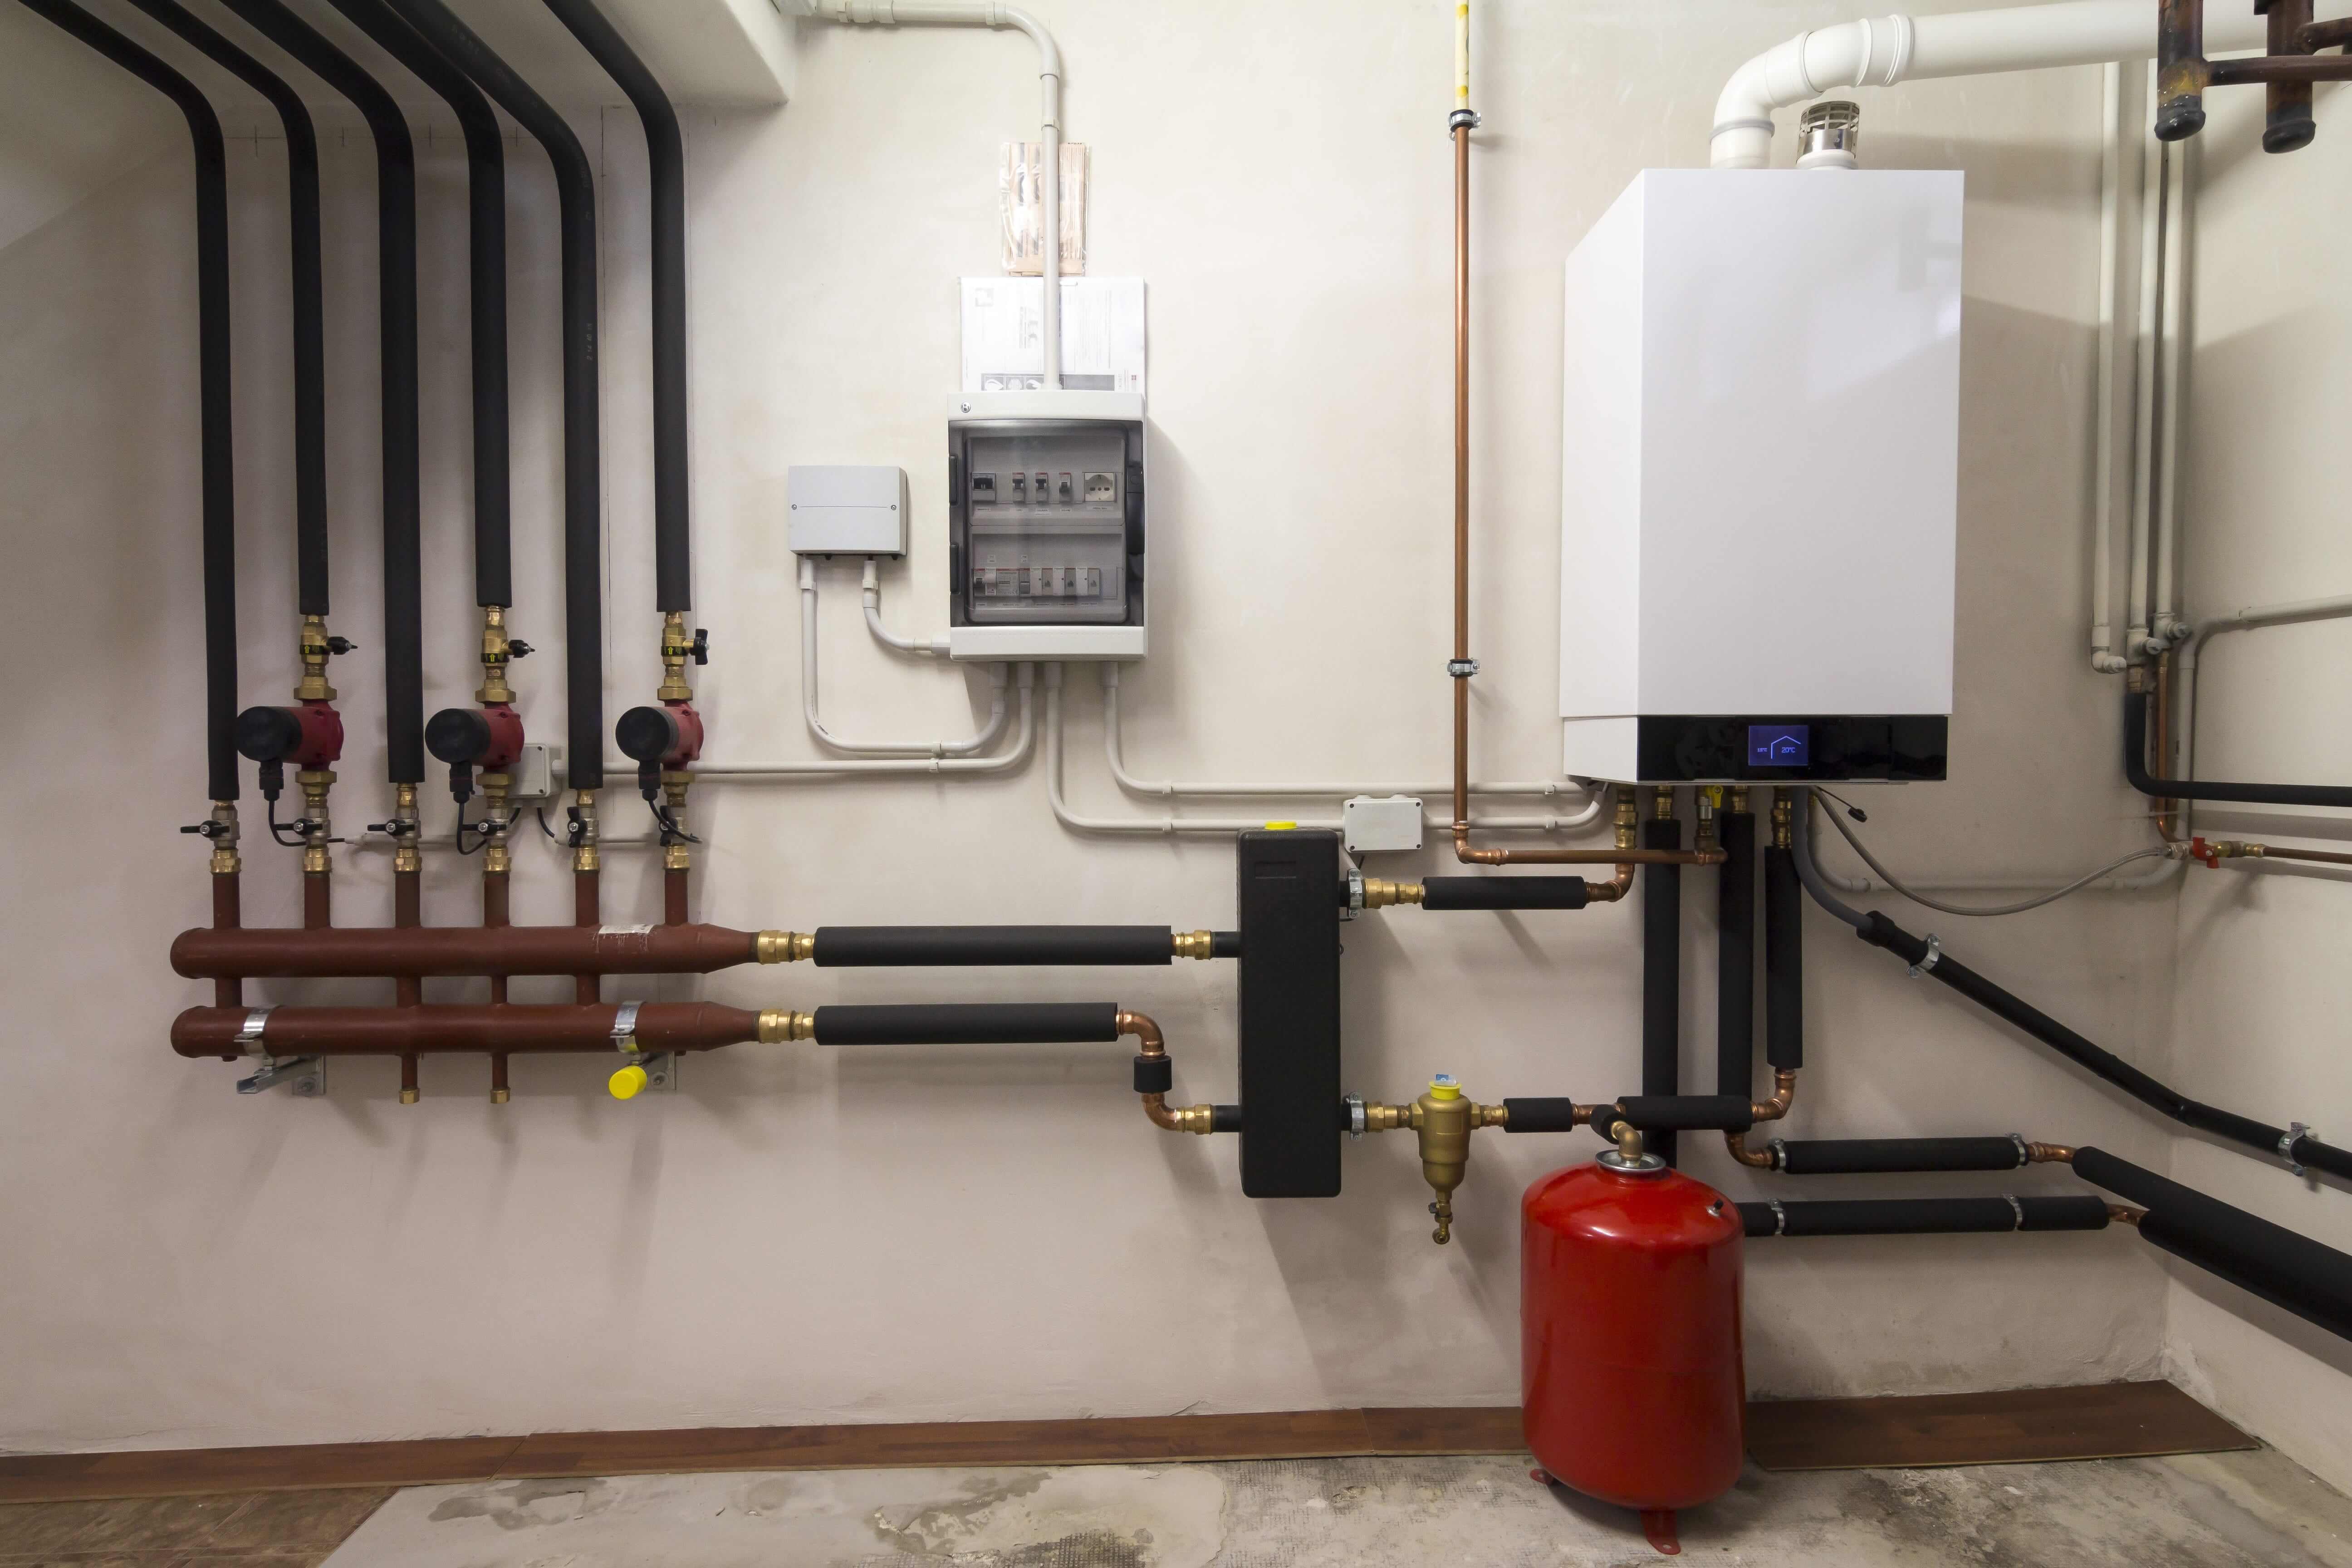 Top 5 Reasons to Convert Heating Systems From Oil to Natural Gas